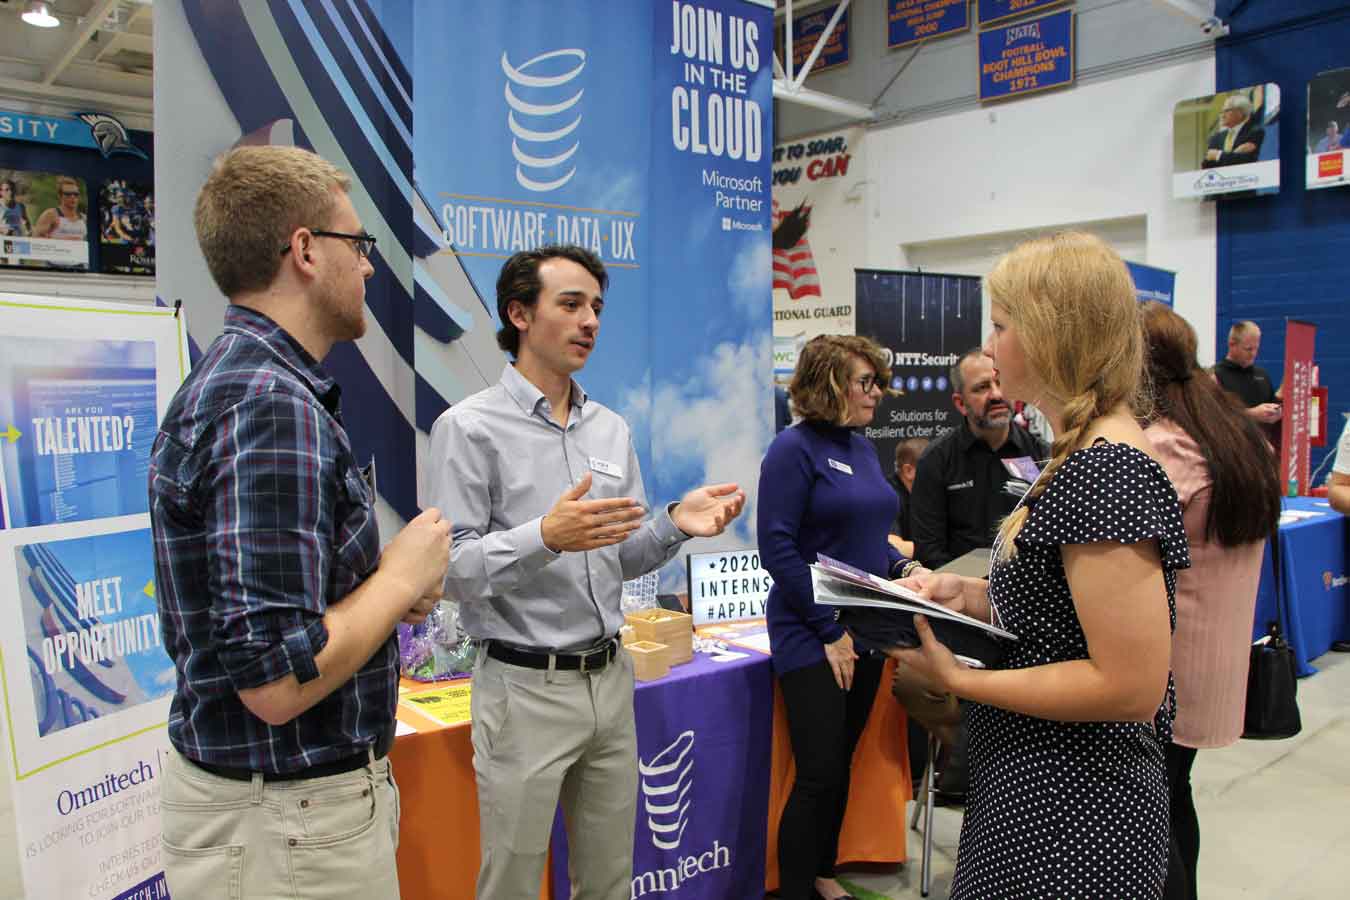 Job Fair at Dakota State. DSU student getting information from employers at their booth.